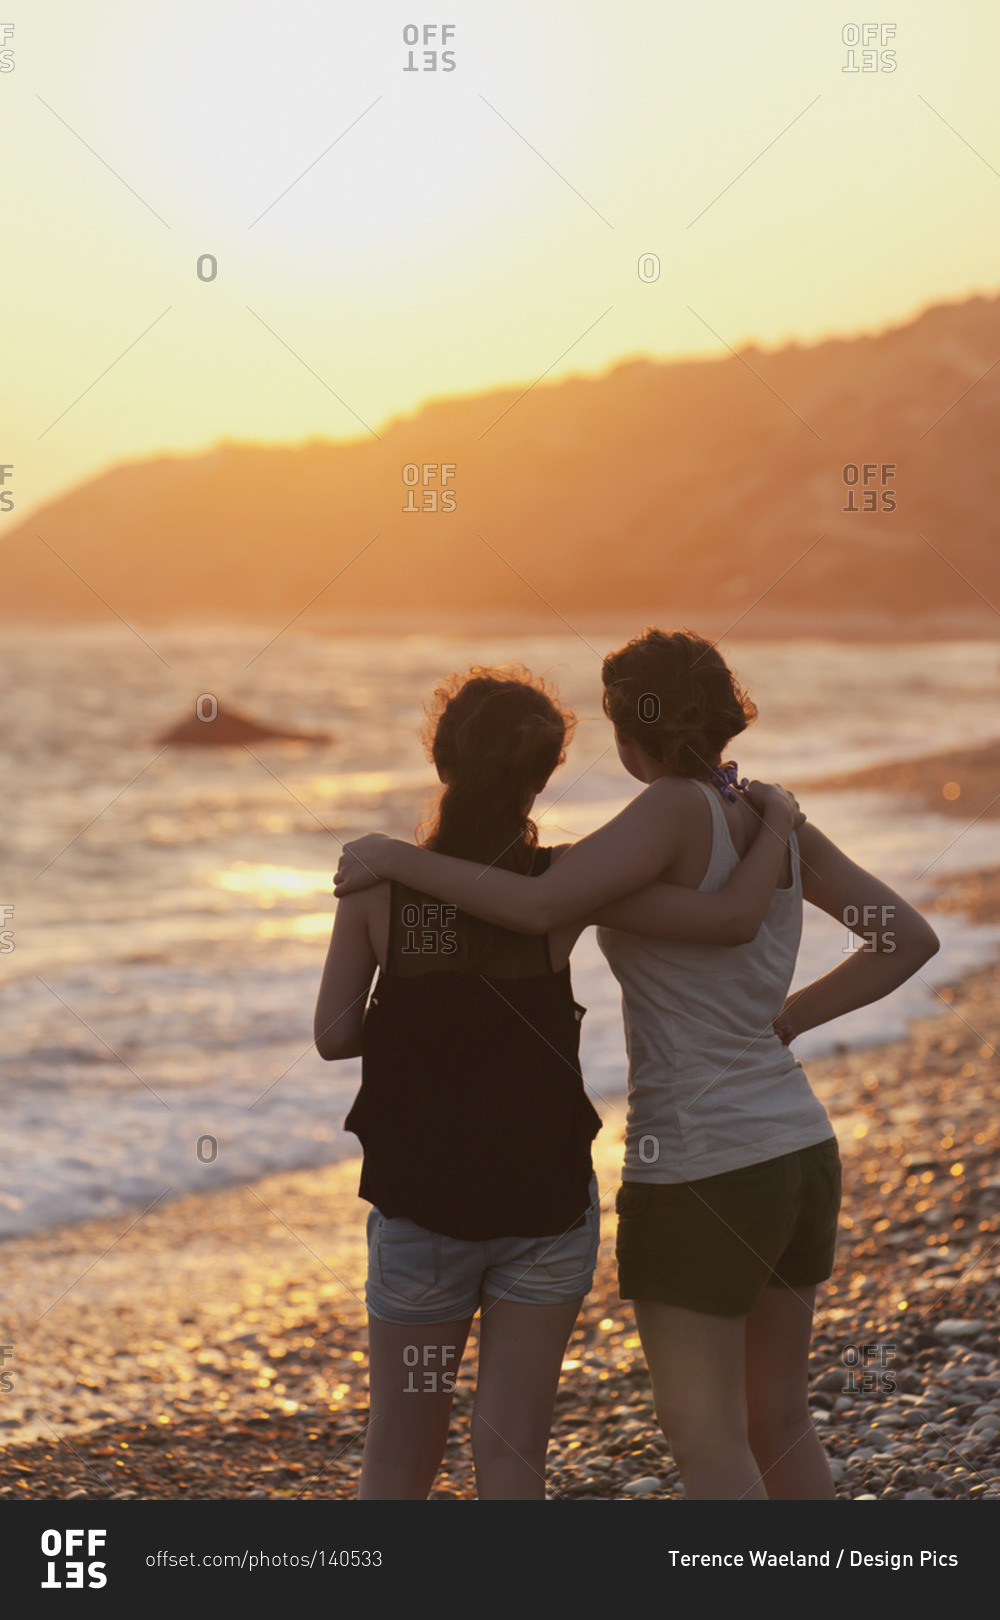 Two young women in an embrace watch the sunset while looking out over the ocean